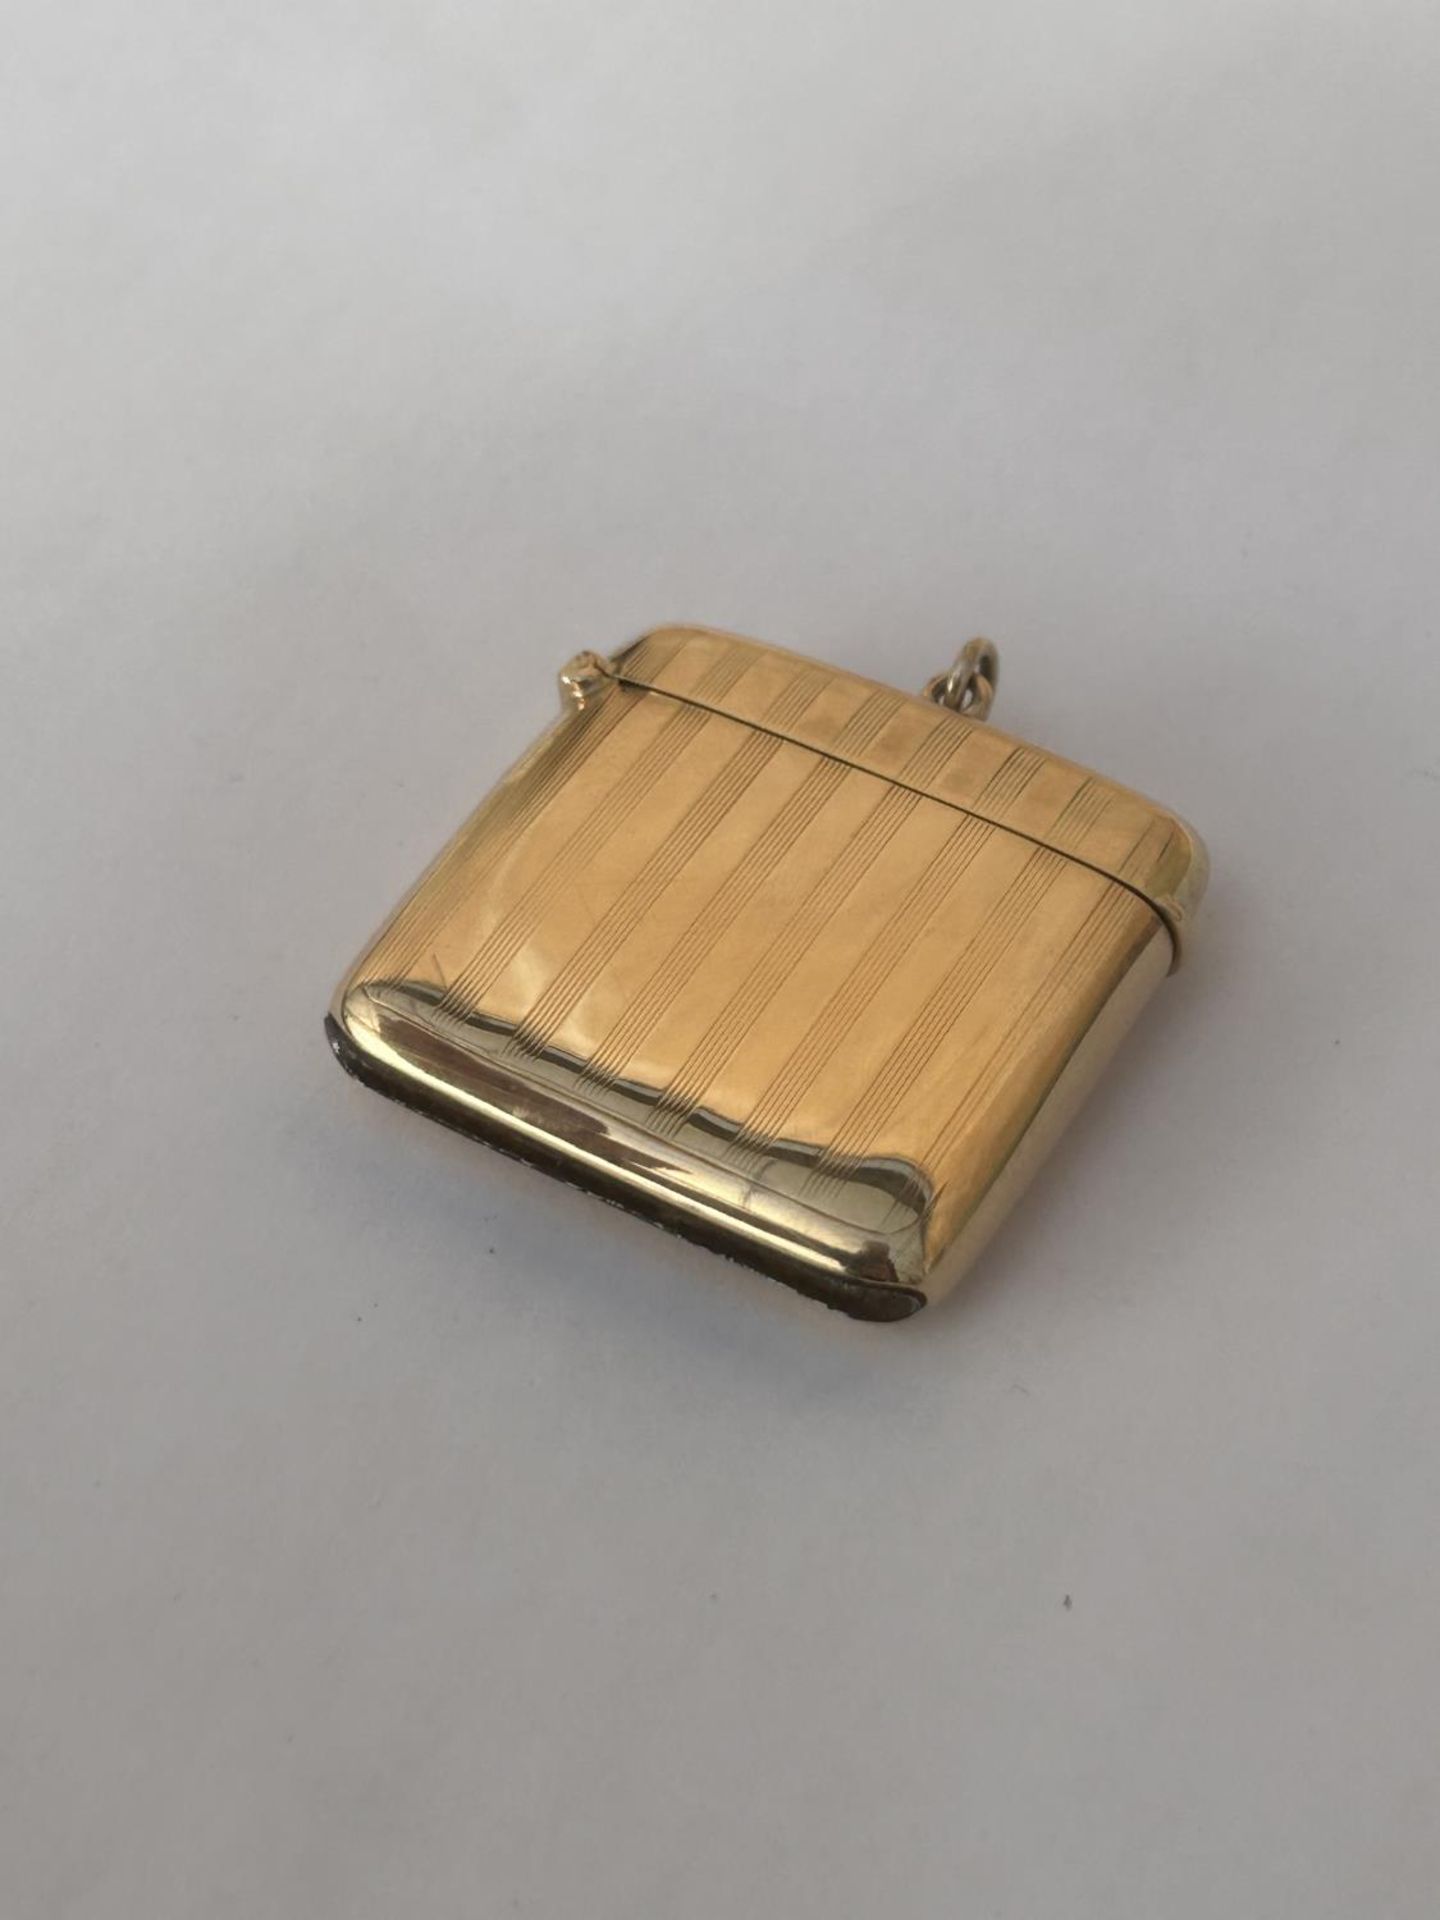 A 9CT GOLD FULLY HALLMARKED ENGINE TURNED VESTA CASE WITH FLIP TOP COVER & SUSPENSION LOOP WEIGHT - Image 2 of 5